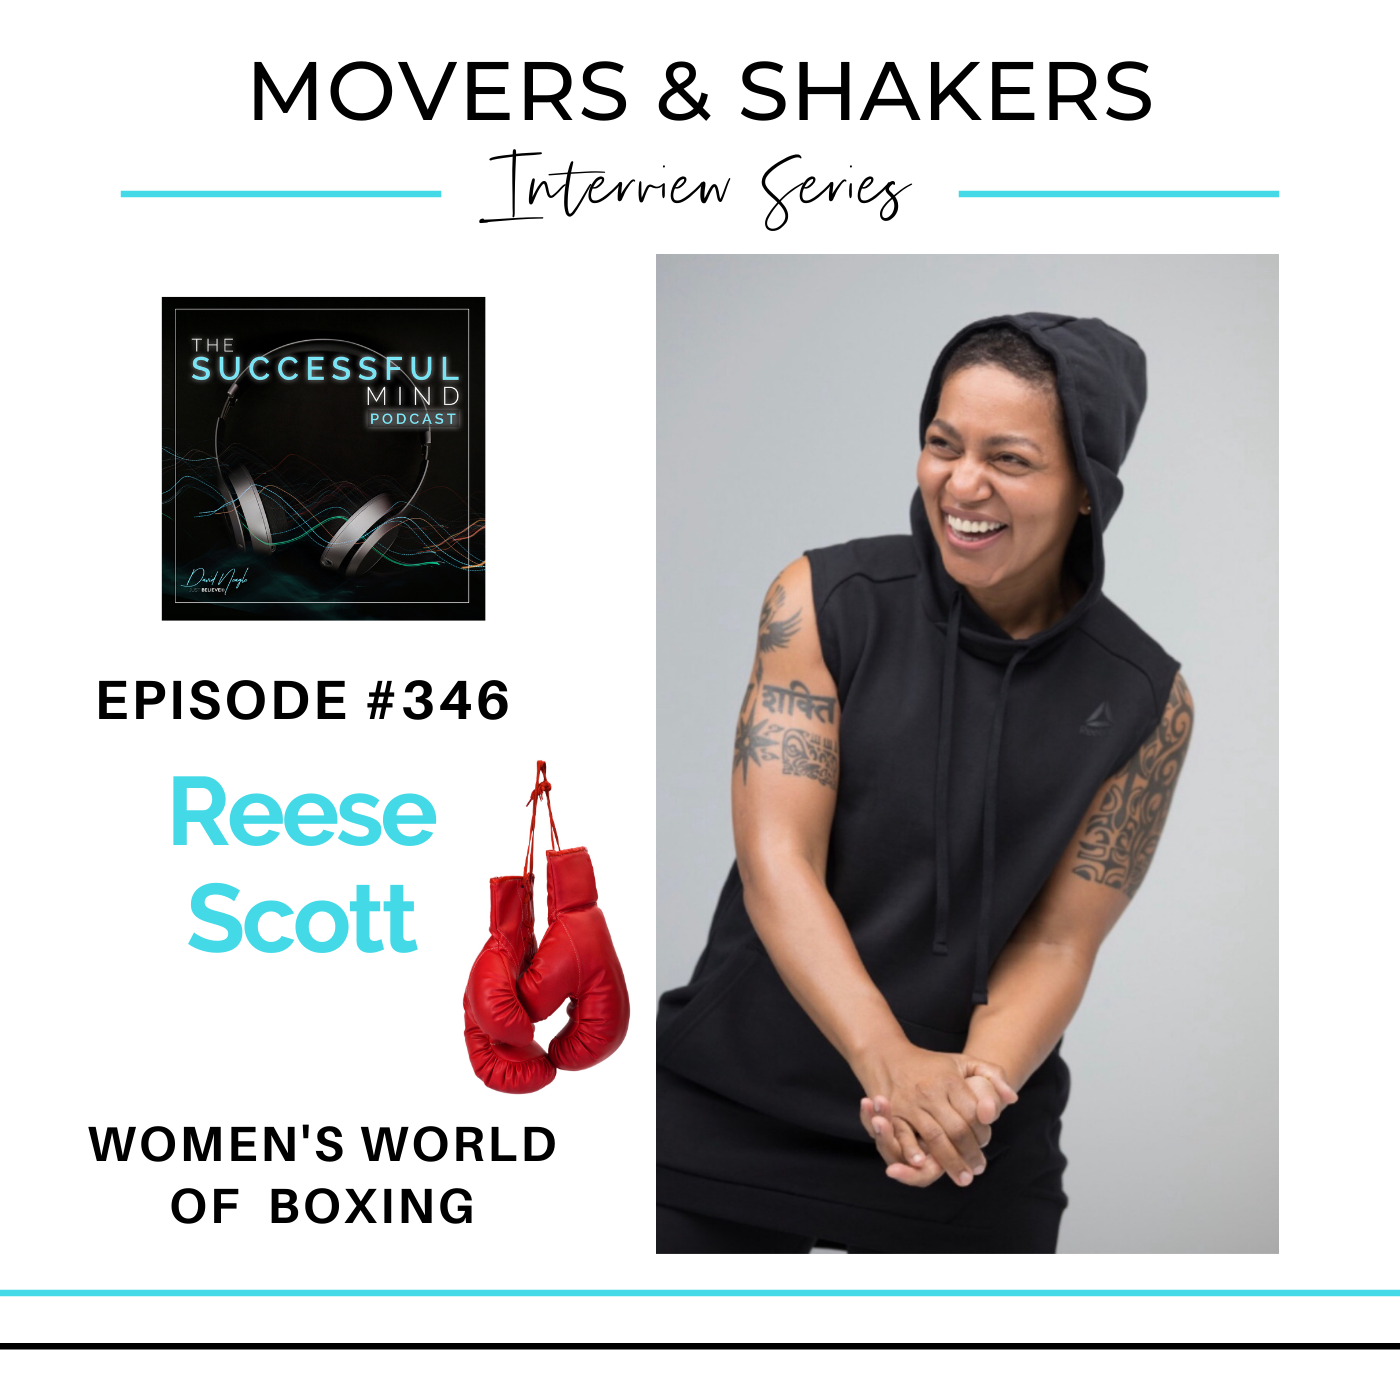 Movers & Shakers - Reese Scott - Women’s World of Boxing